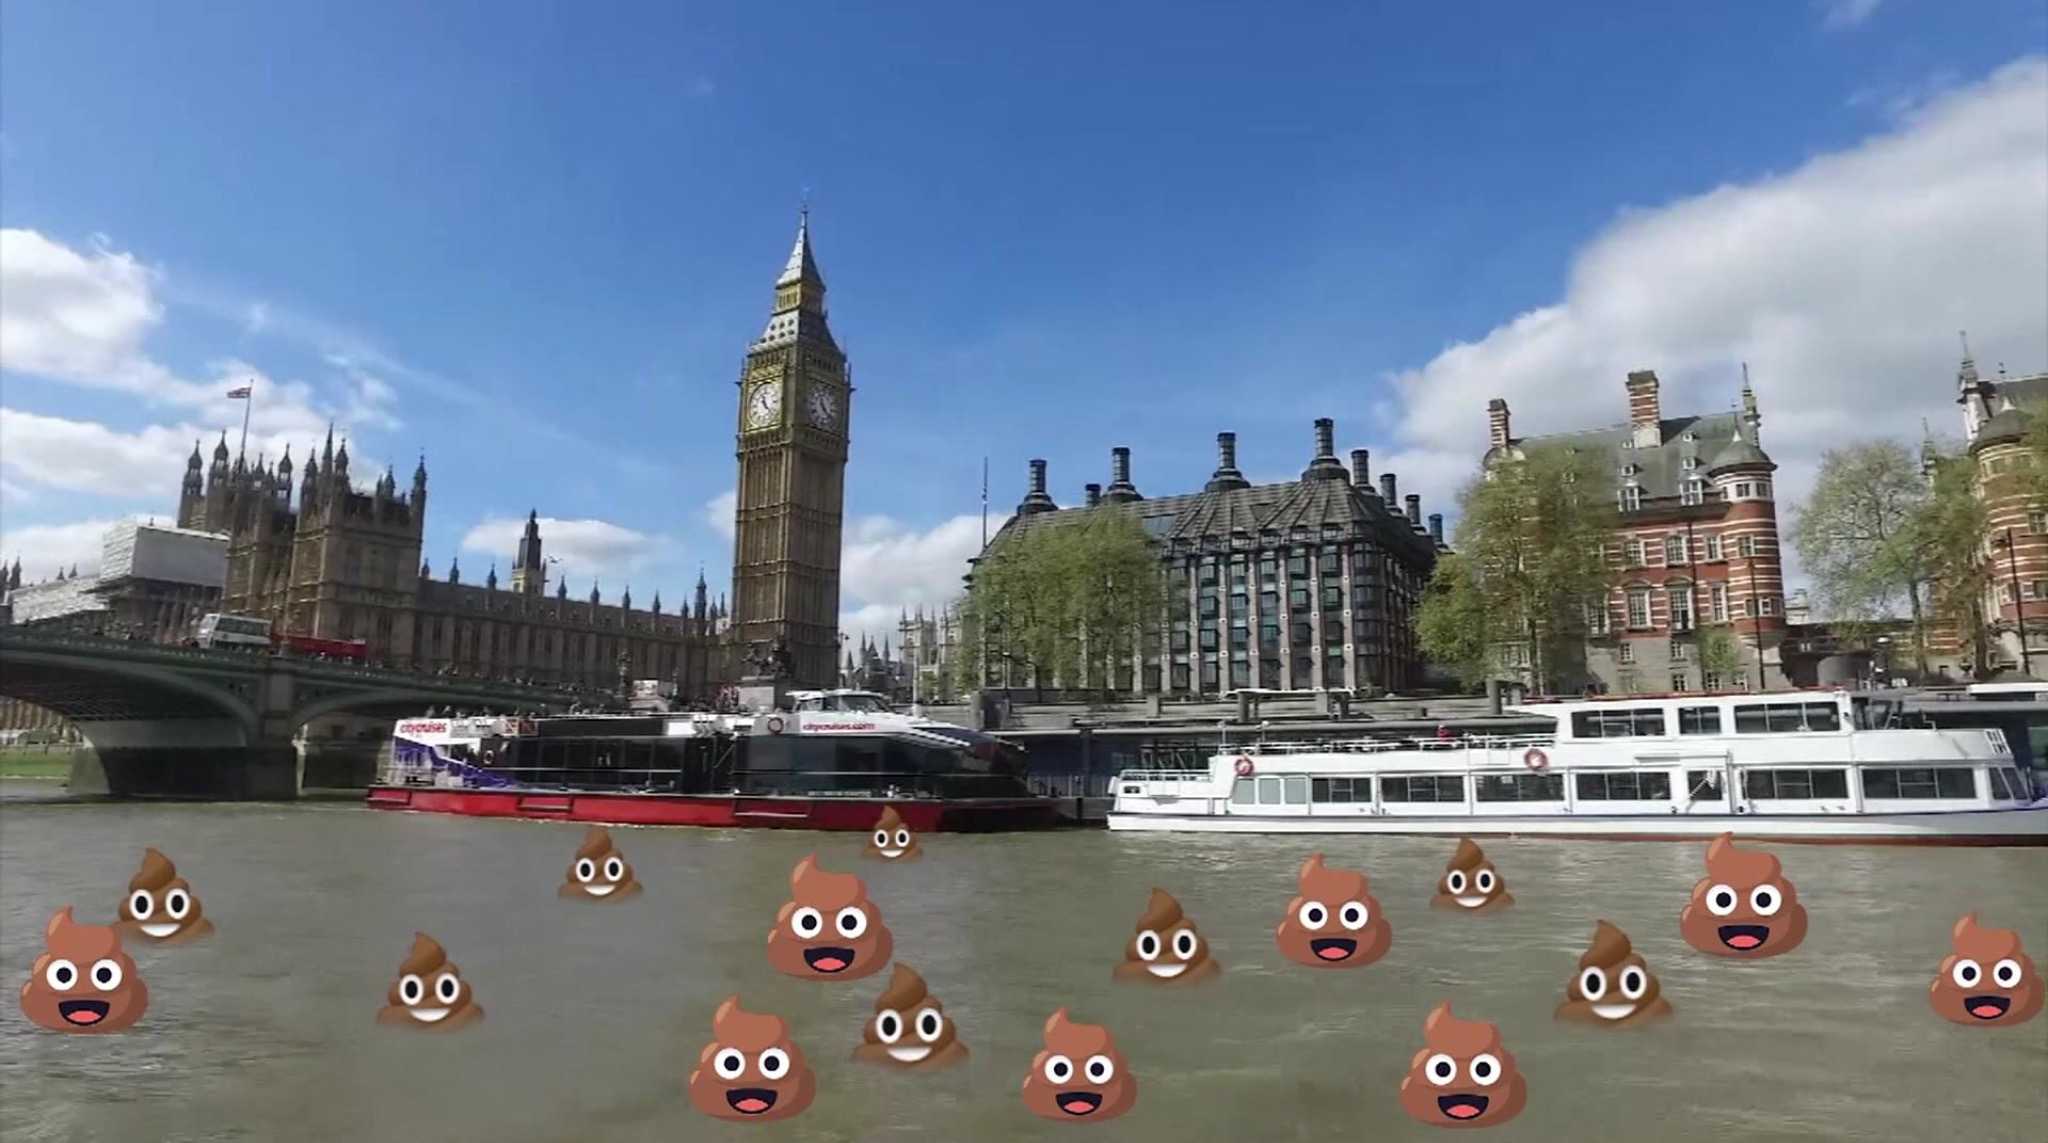 Project to clean-up River Thames like a poo motorway